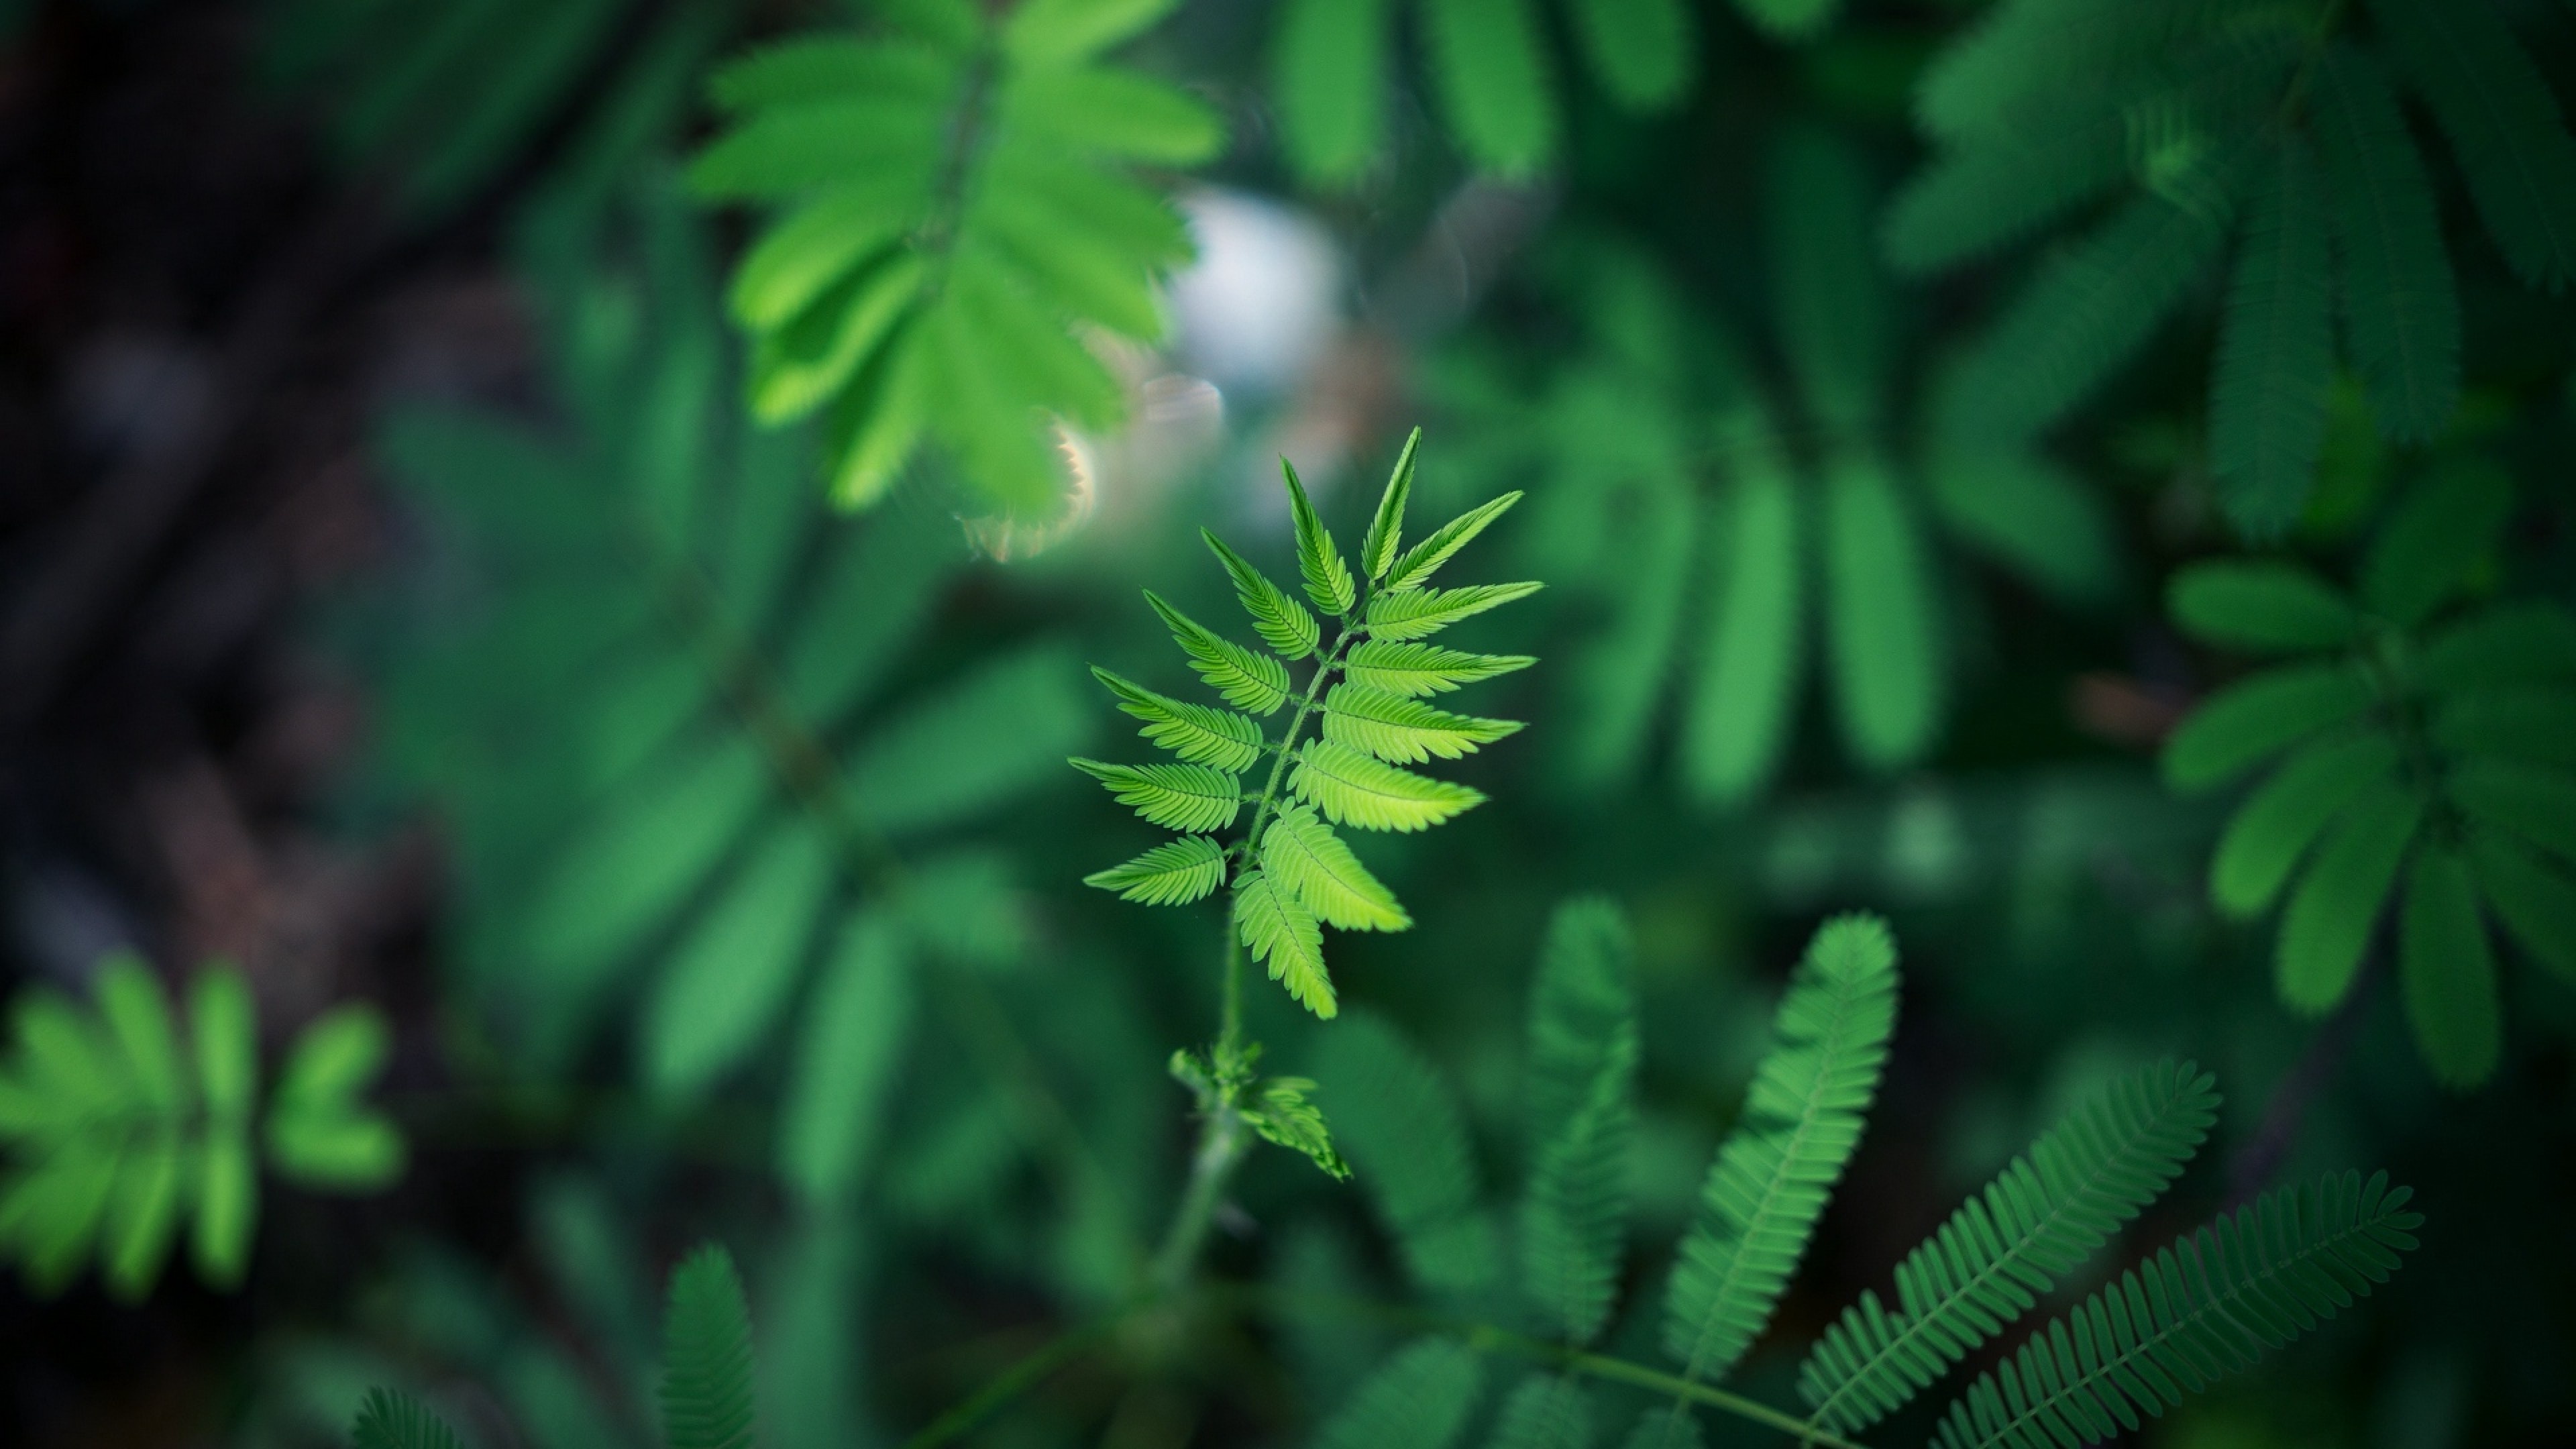 Green Leaf: The complex leaves of a flowering plant, Natural beauty. 3840x2160 4K Wallpaper.